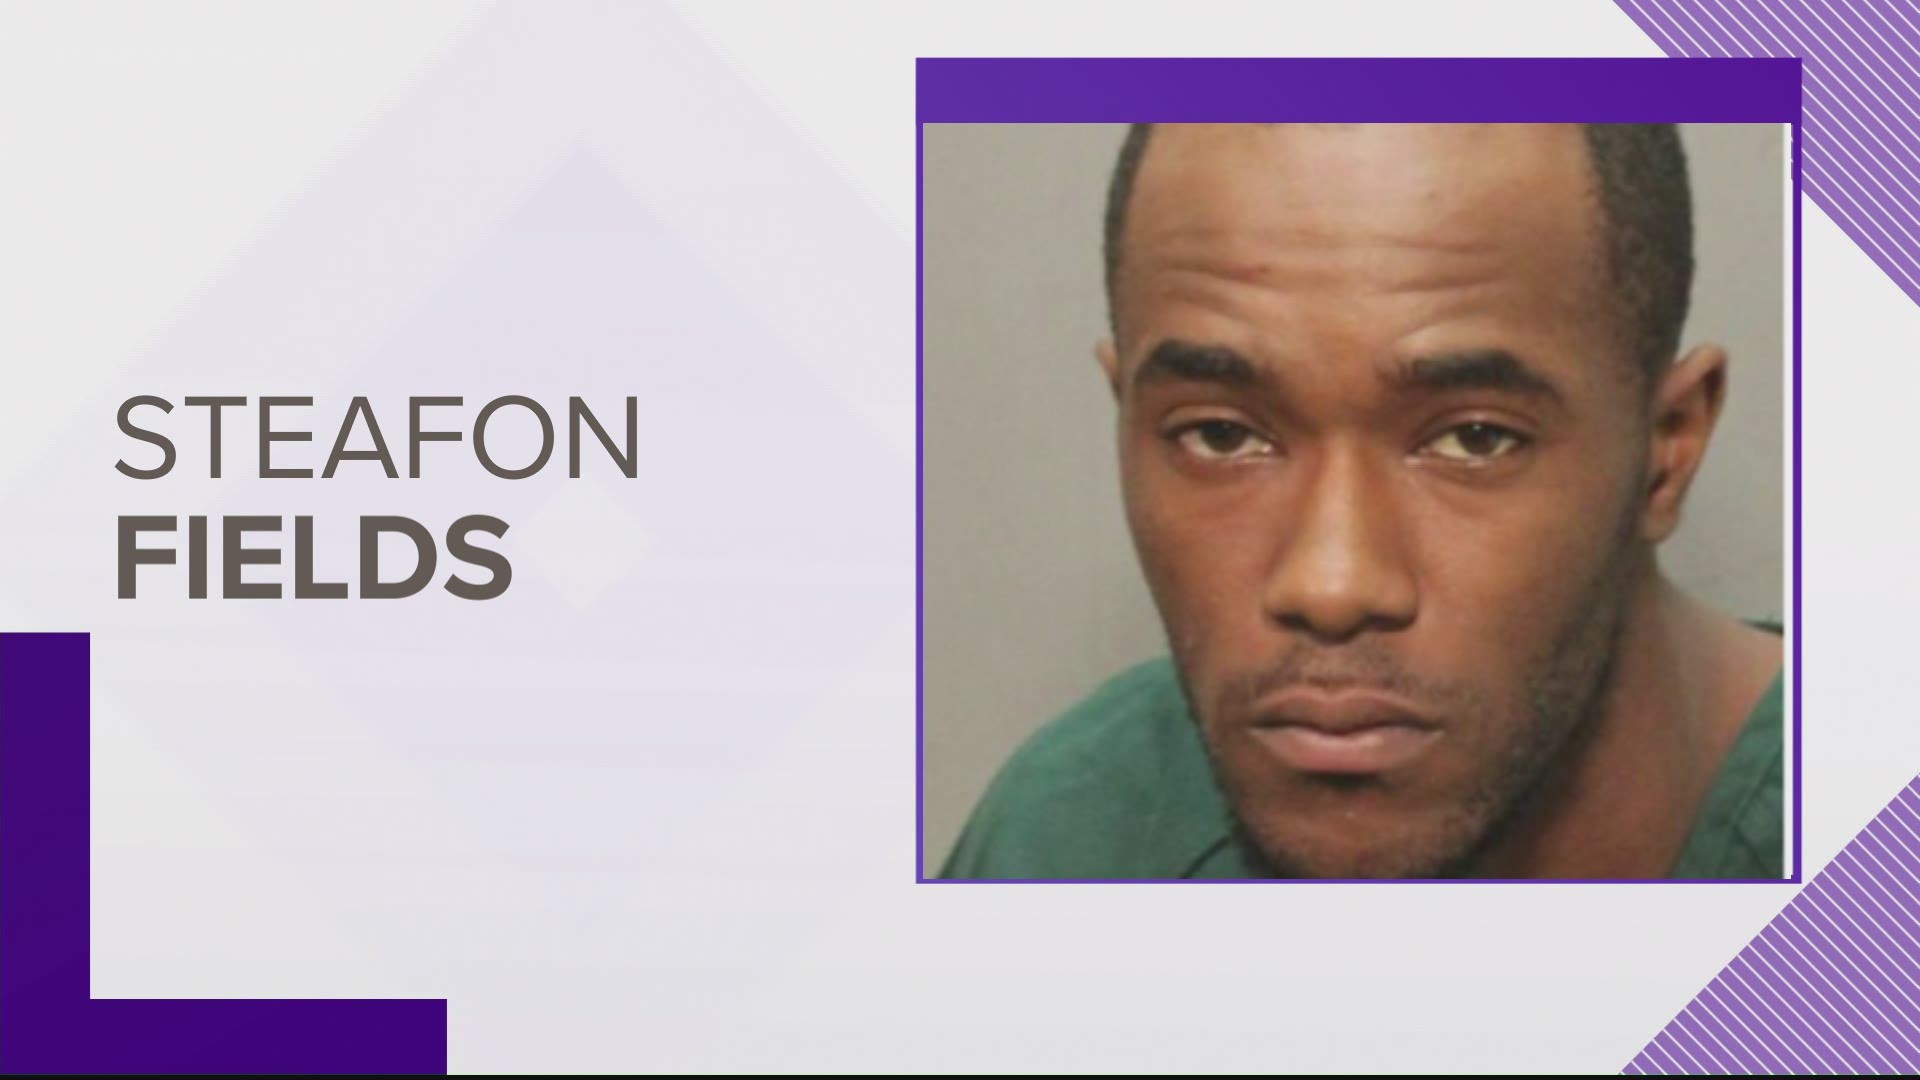 Steafon Fields was arrested Saturday in connection to the Sept. 11, 2020 shooting death of a 19-year-old man in Jacksonville's Urban Core.